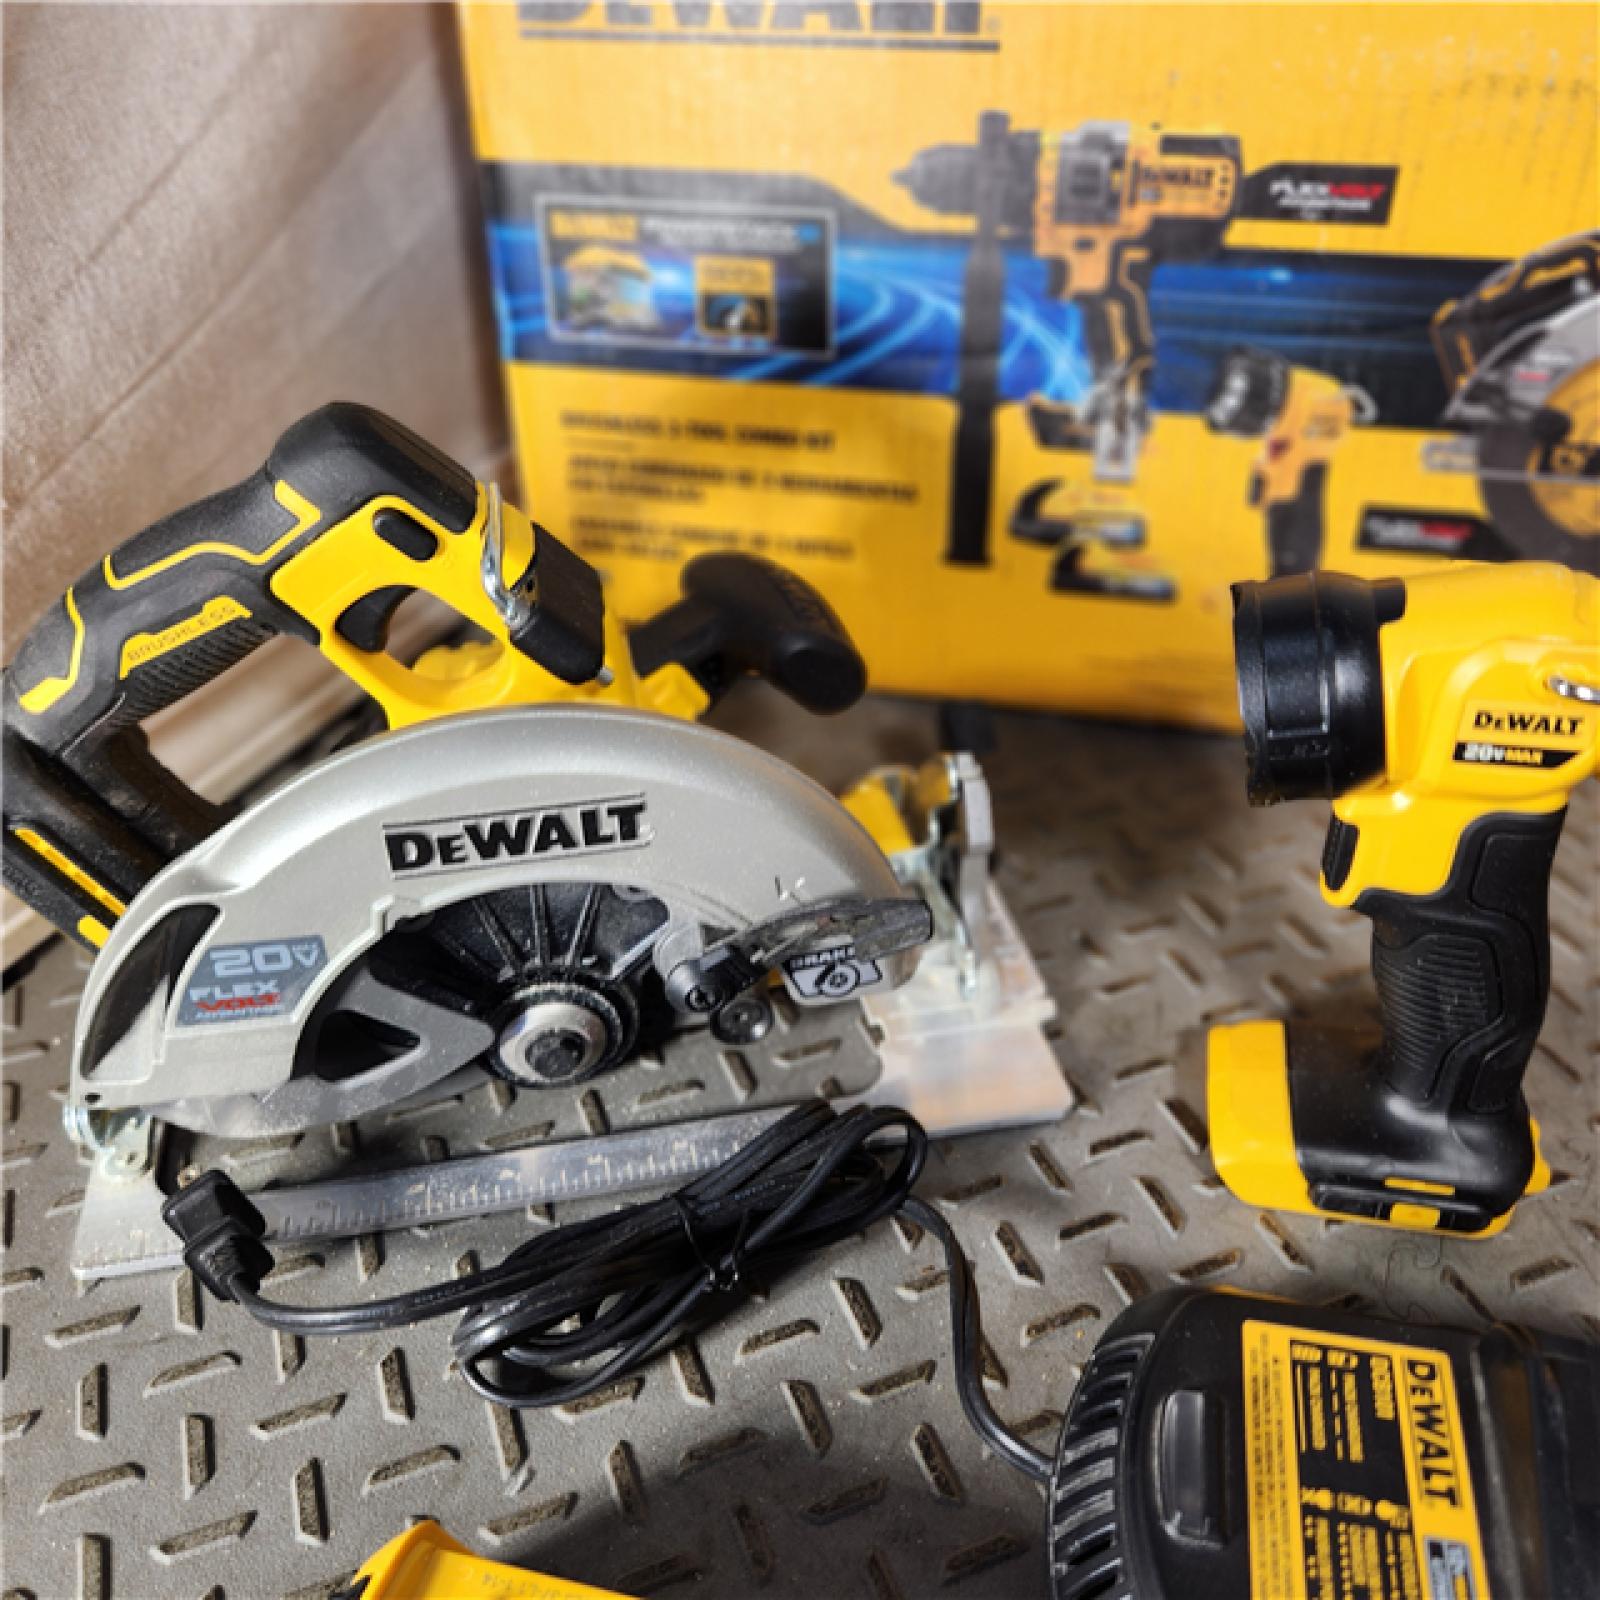 Houston Location - AS-IS DEWALT 20V MAX Lithium-Ion Cordless 3-Tool Combo Kit with 1.7Ah Battery (MISSING 5Ah Battery) - Appears IN GOOD Condition